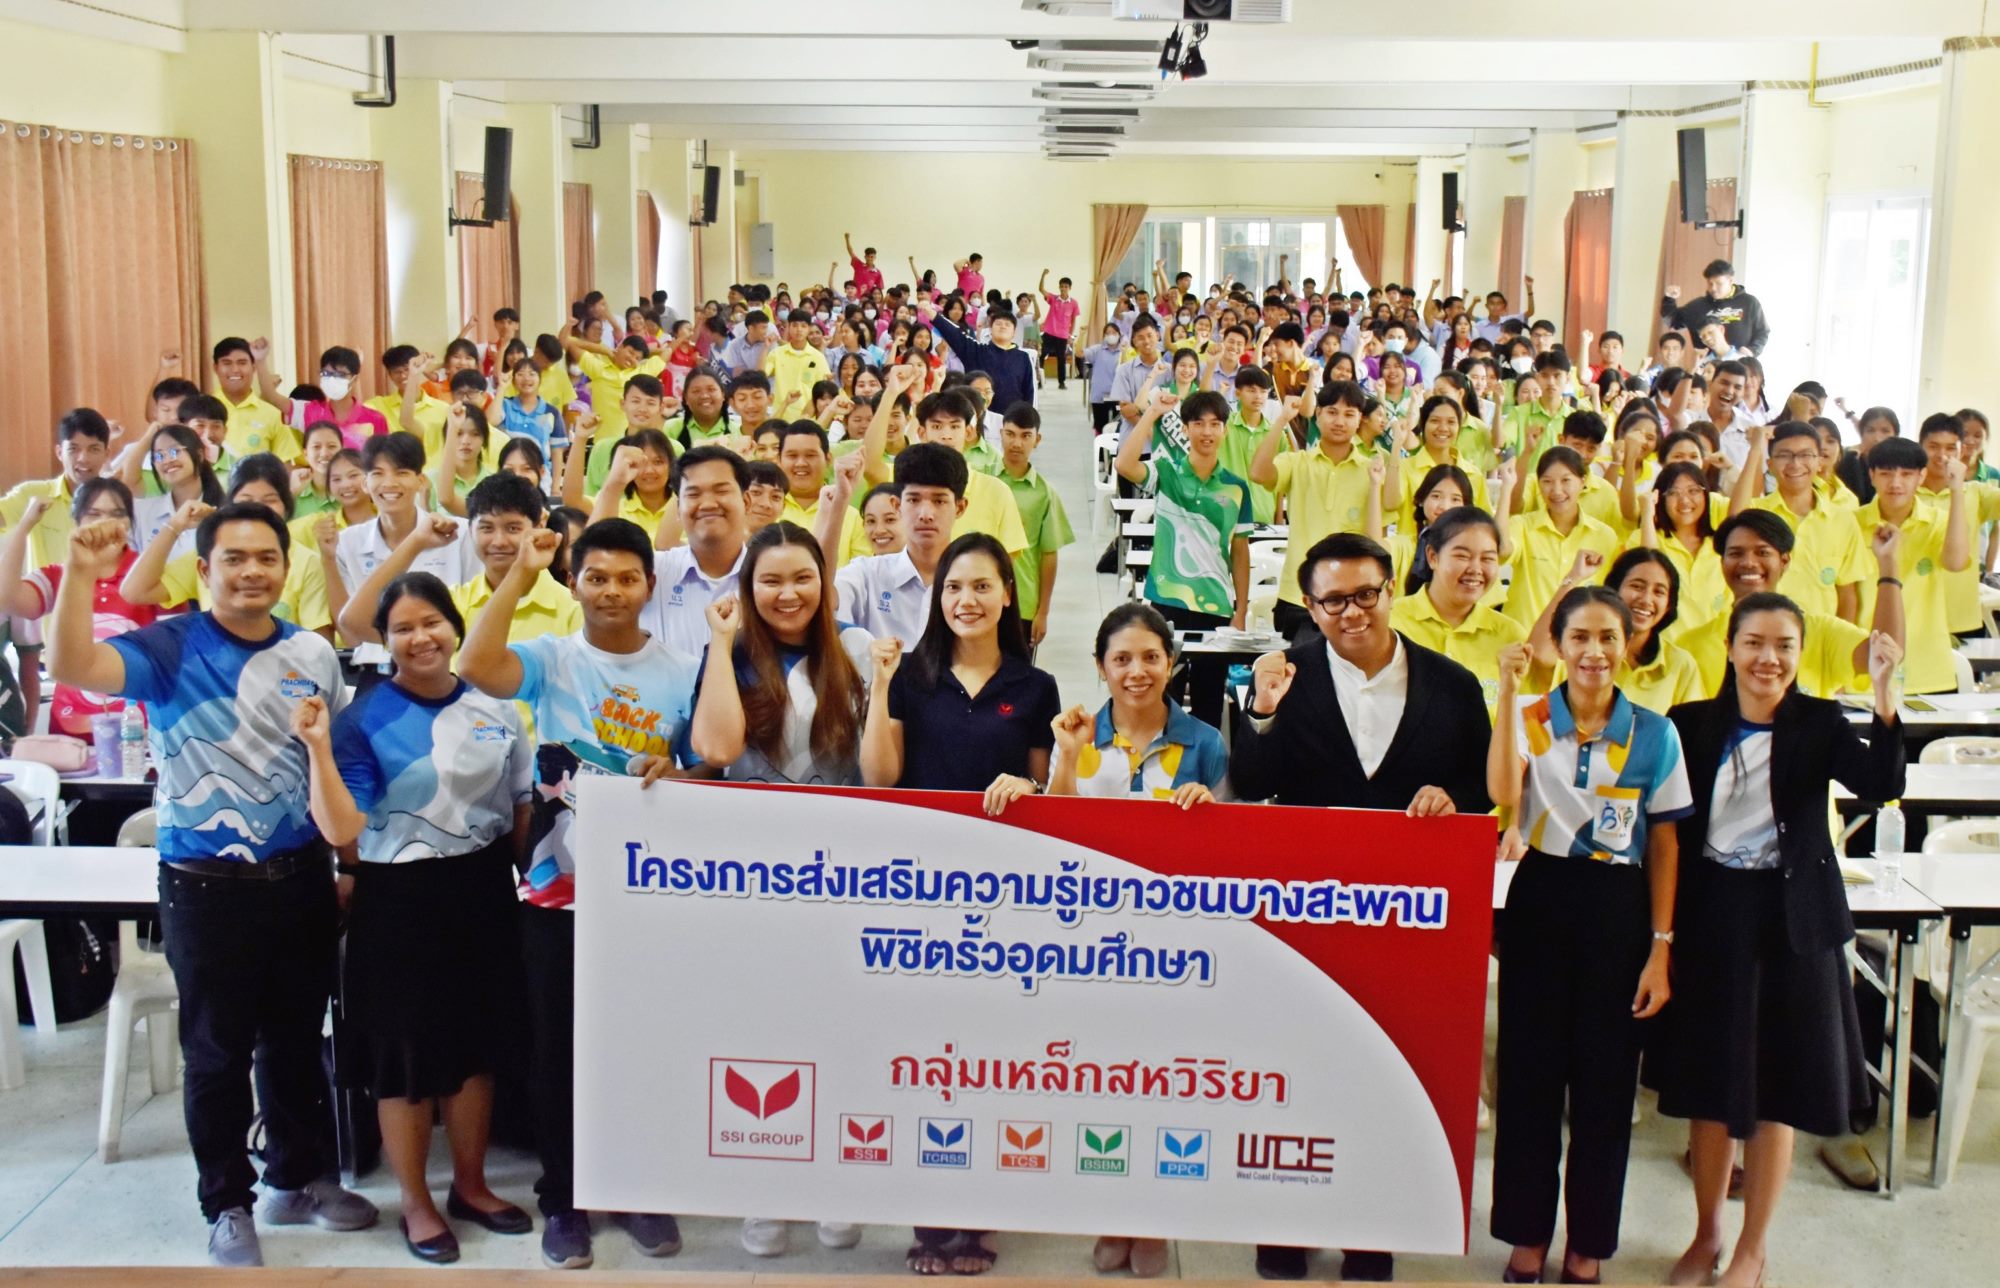 Academic Enhancement of Bang Saphan Youth to University Admission, SSI Group arranged A-Level Tutorial Program